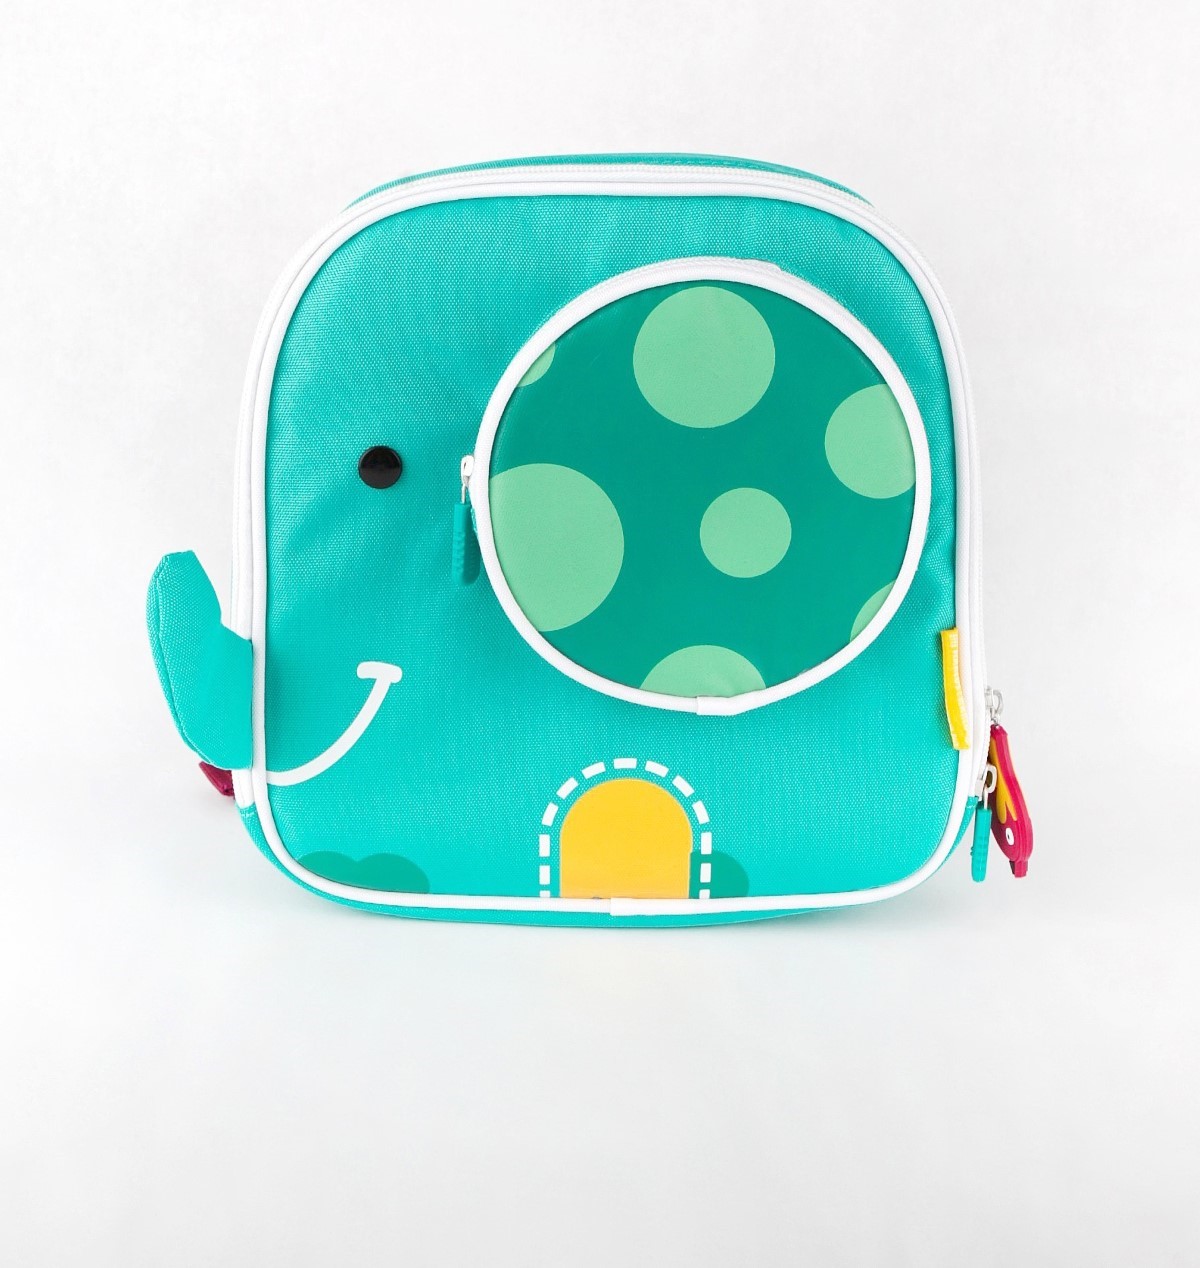 Marcus & Marcus Ollie The Elephant Green Insulated Lunch Bag